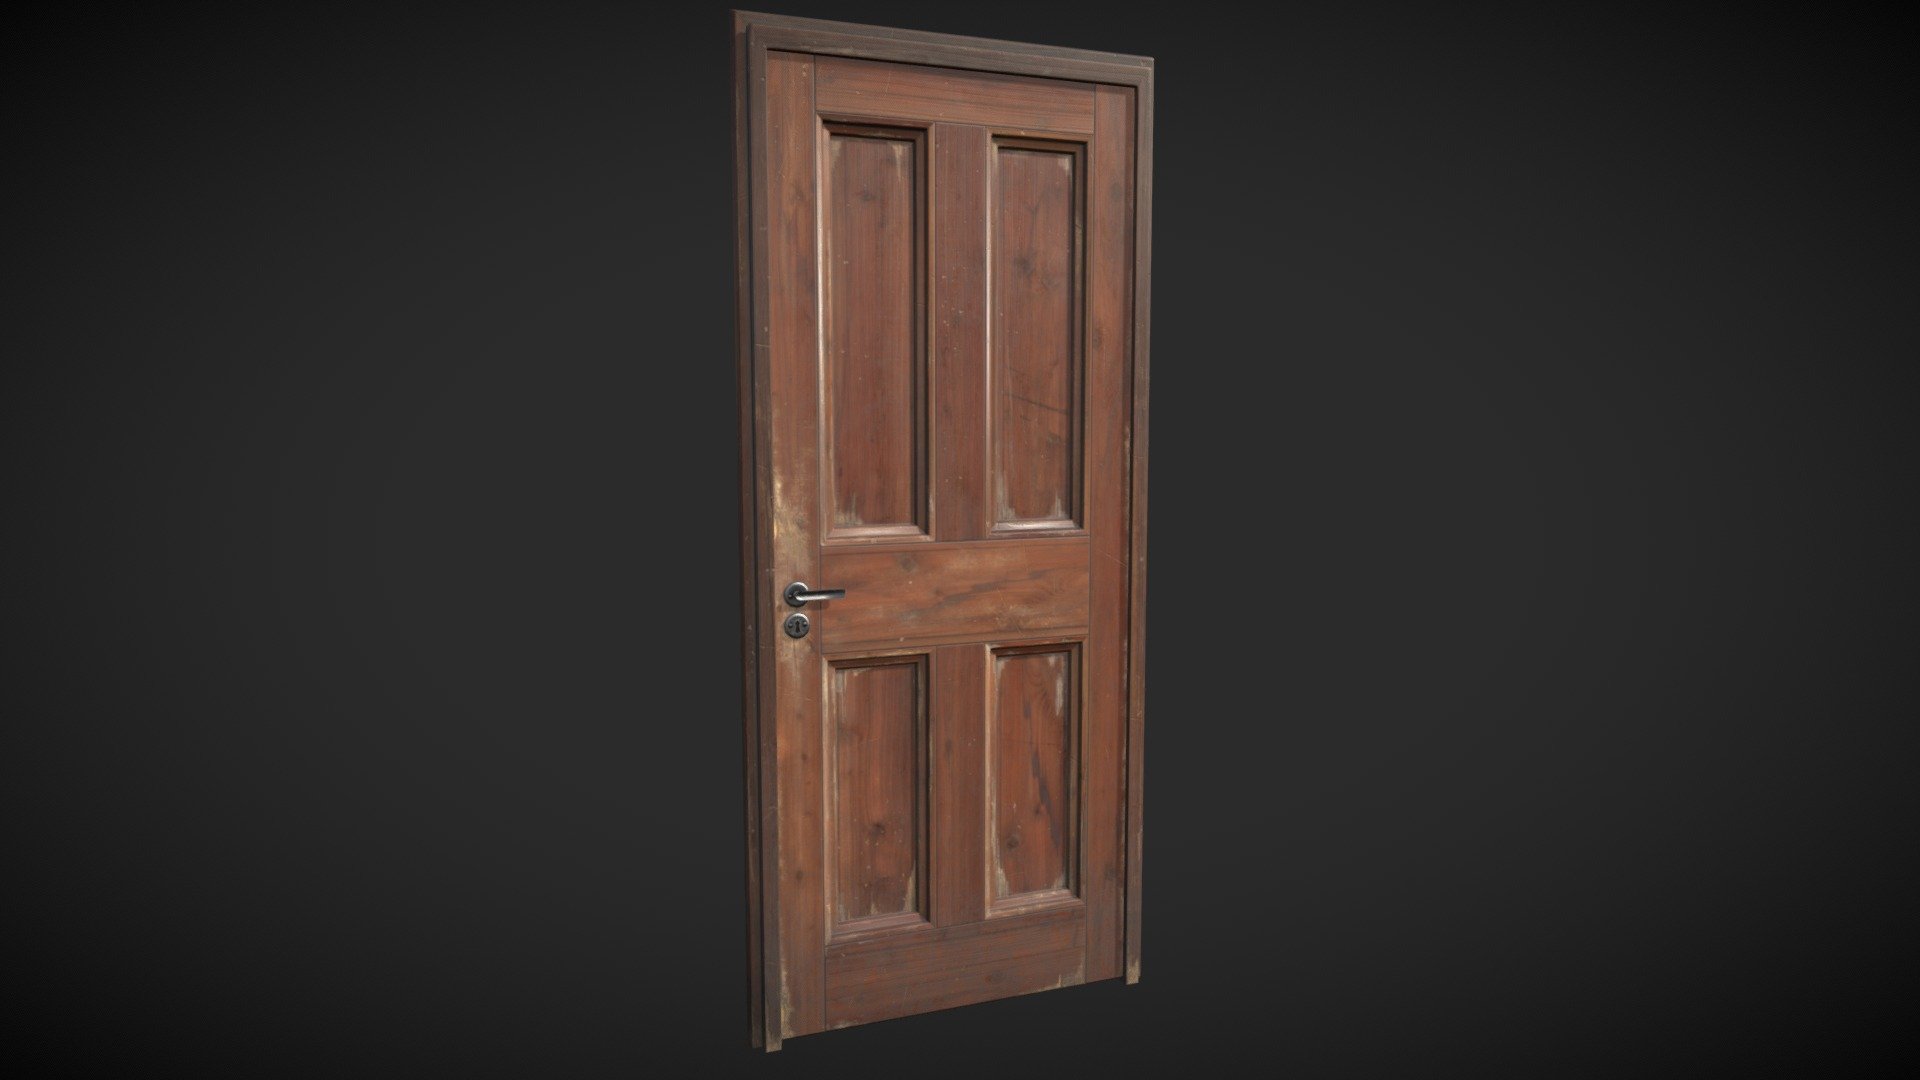 There is only one side of the door. 

Old wooden damaged door with frame. PBR textures 2048x2048 including: ao, base color, normal, metallic and roughness 3d model